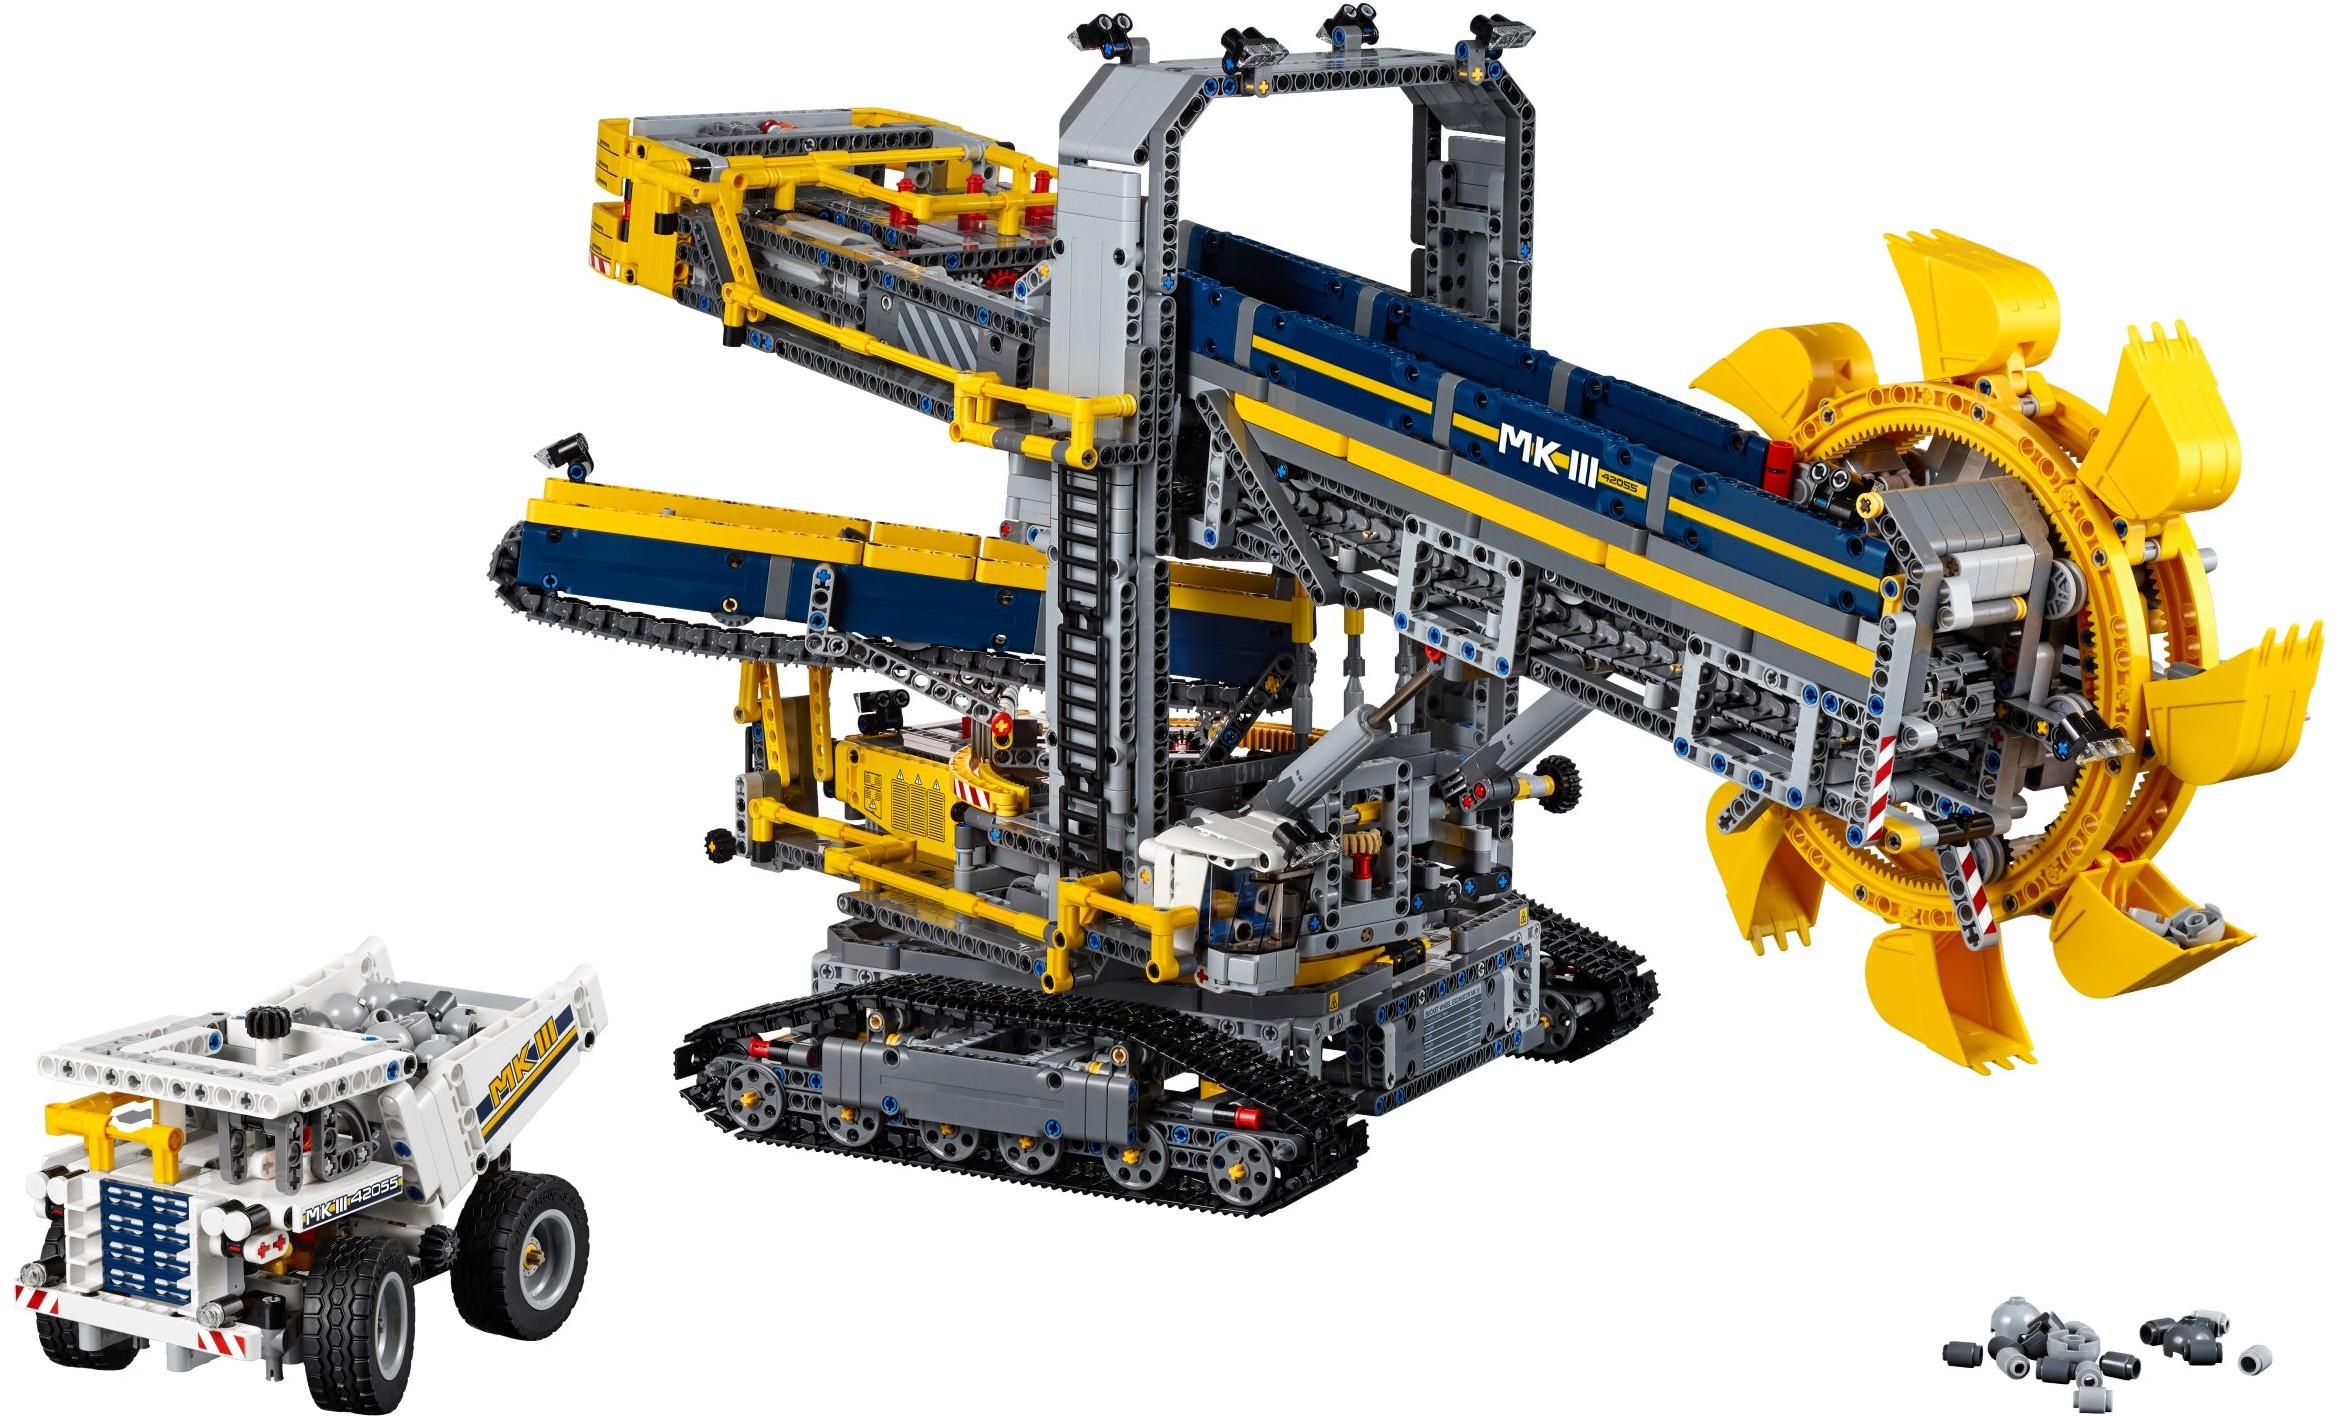 Cyber Monday: more sets discounted at shop.LEGO.com | Brickset: LEGO set guide and